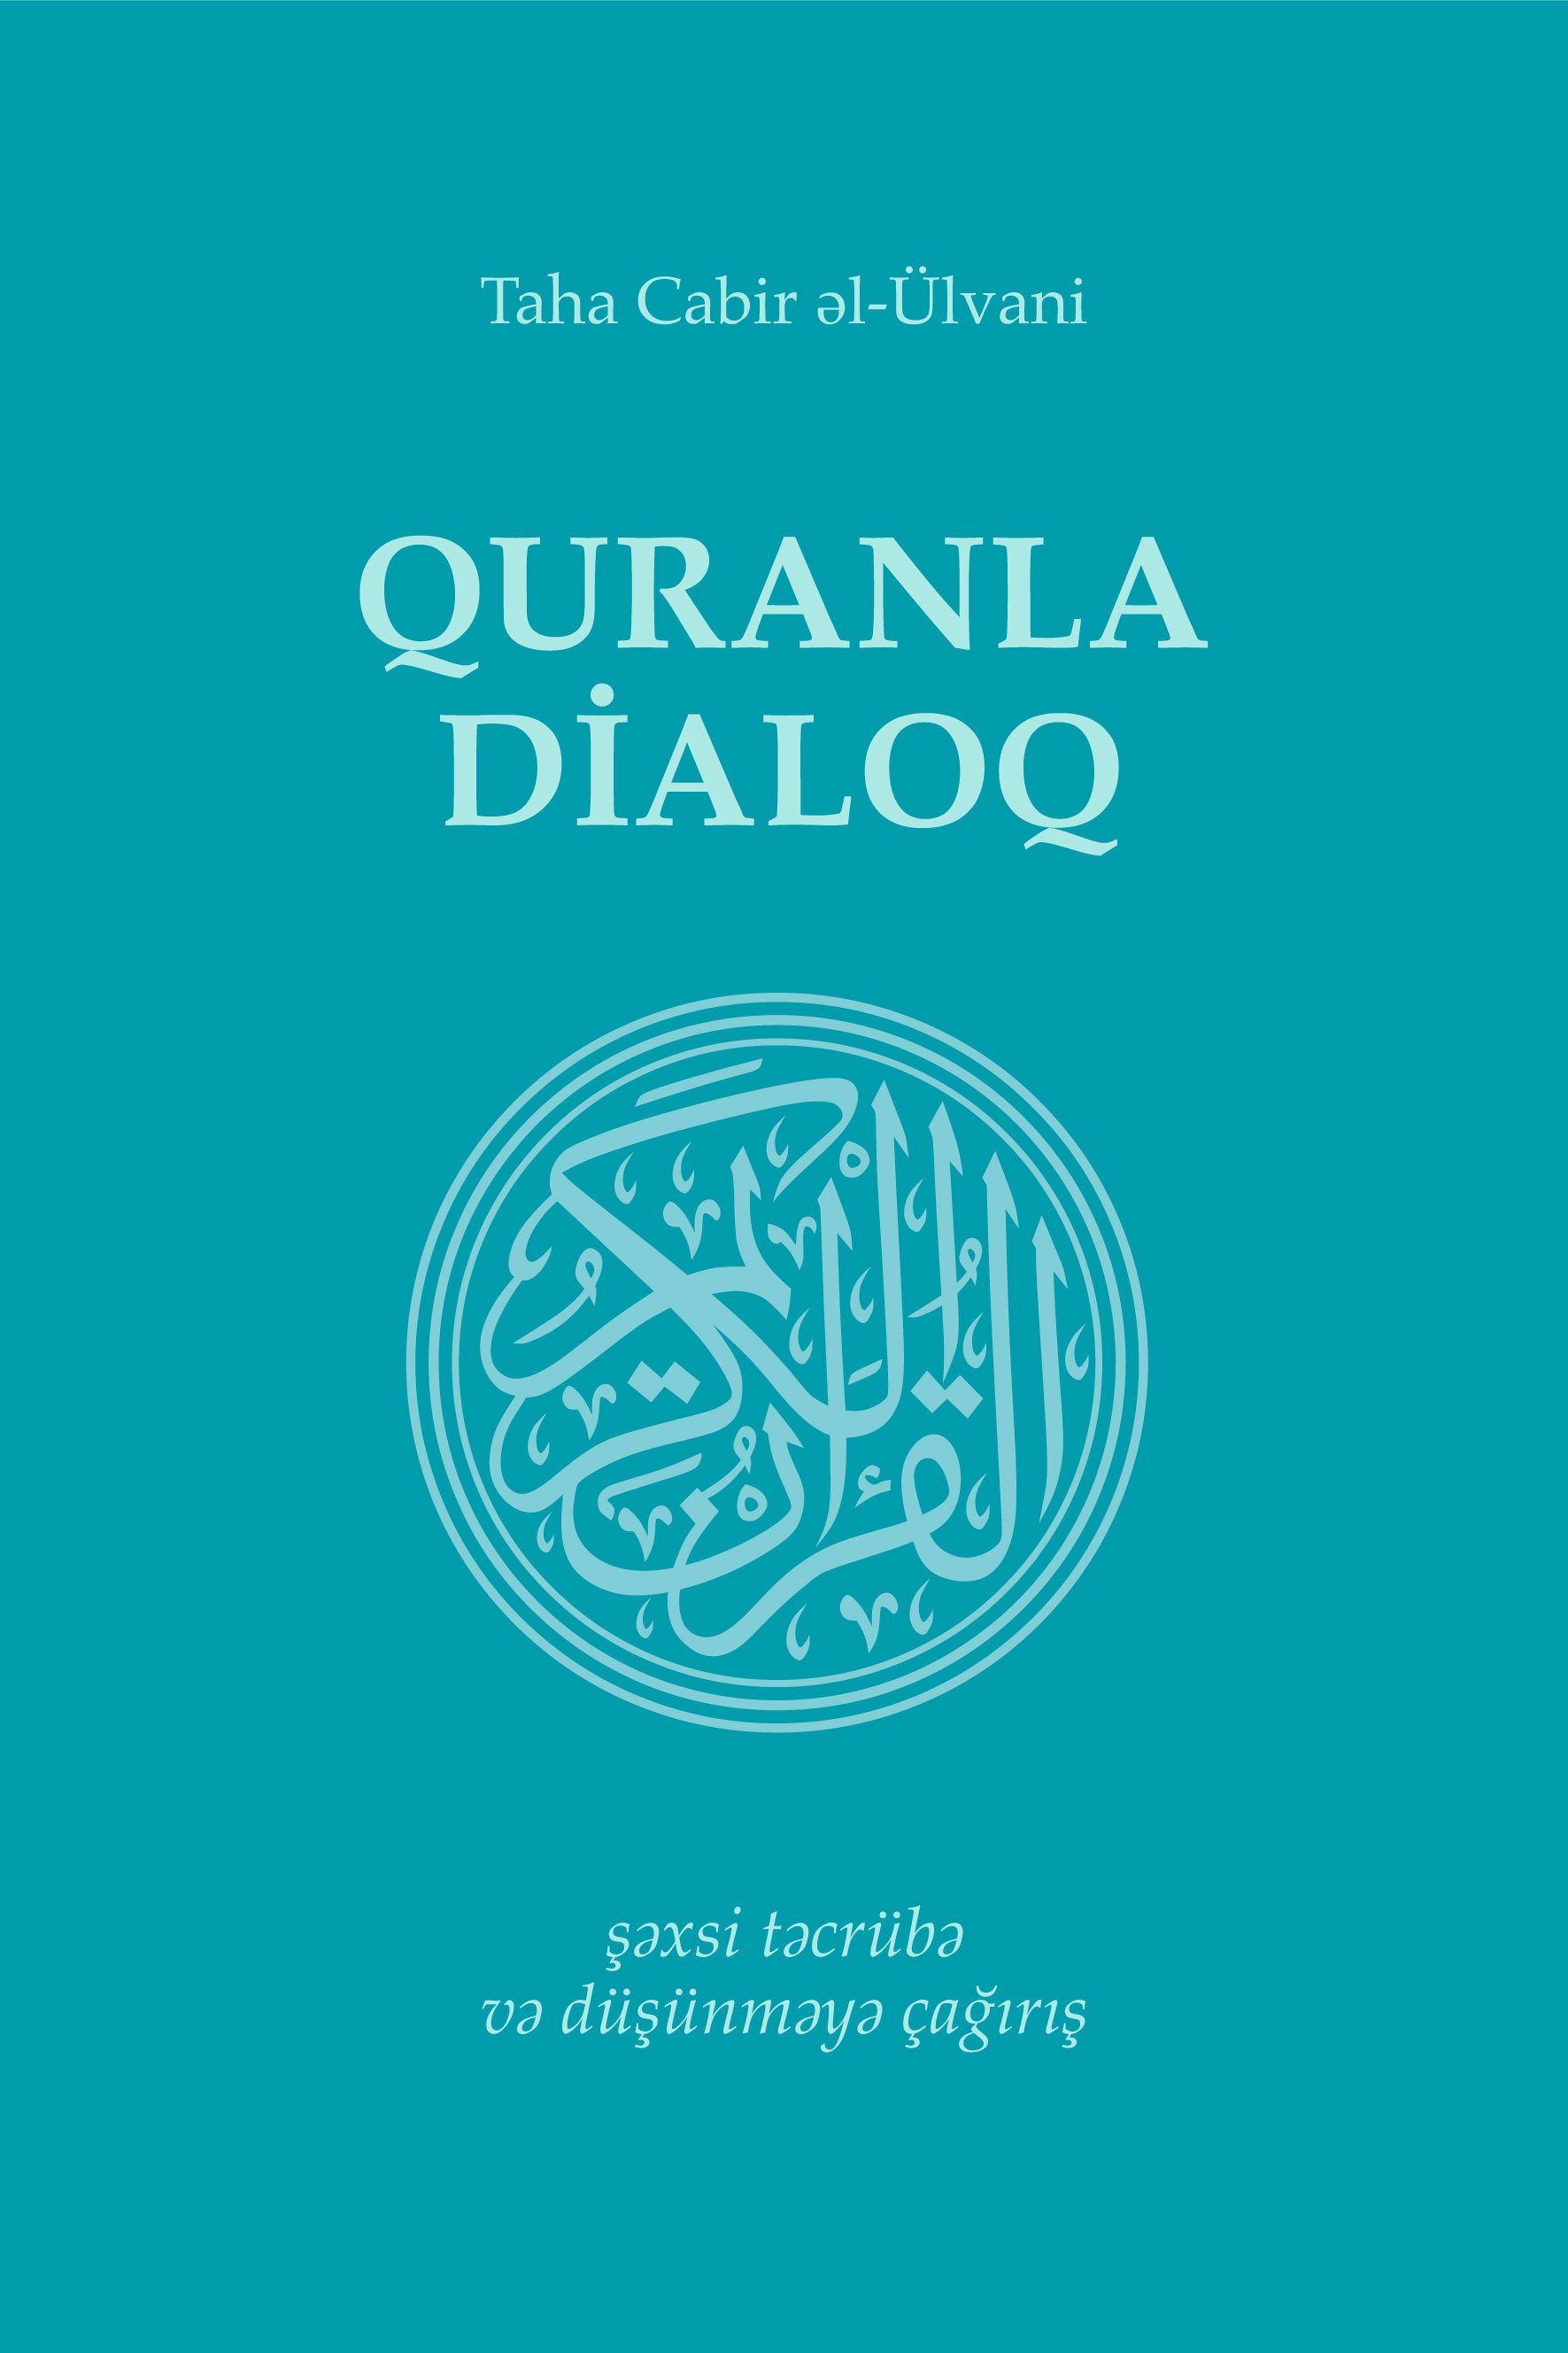 Dialogue with the Qur'an - Azeri translation